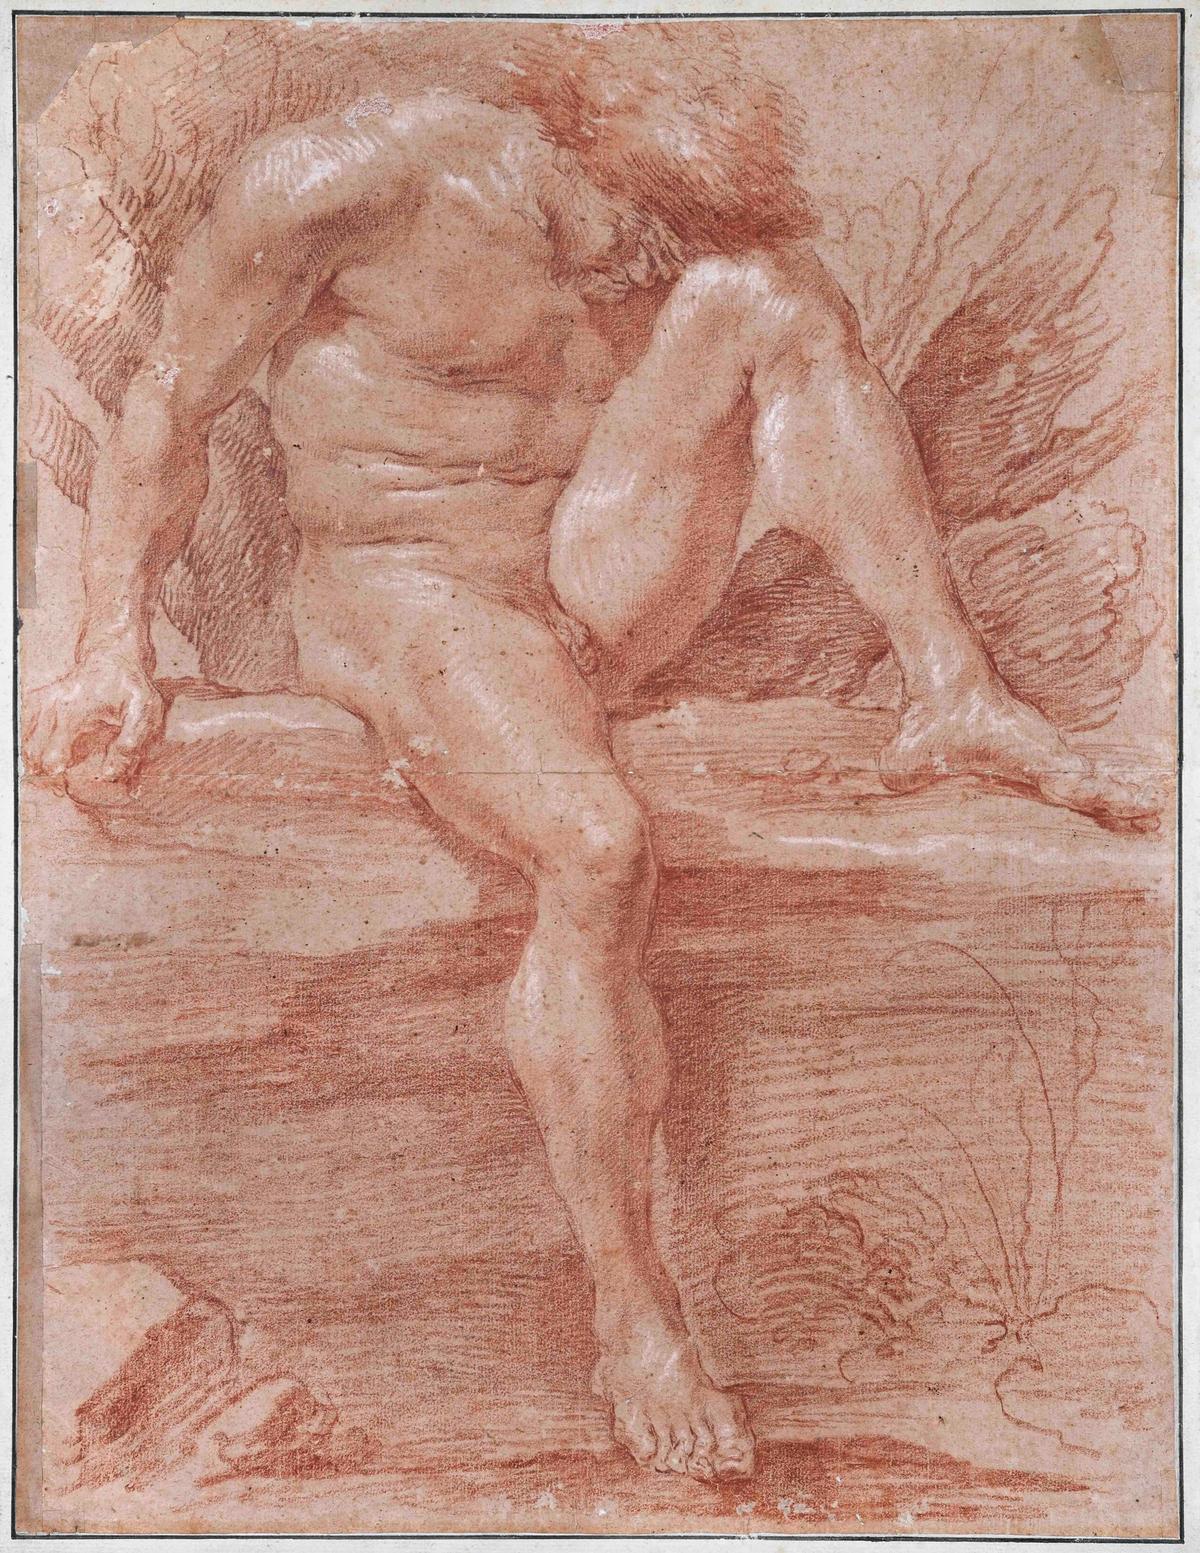 The drawing of a male nude, newly attributed to the 17th-century Italian sculptor Gian Lorenzo Bernini Courtesy of Actéon